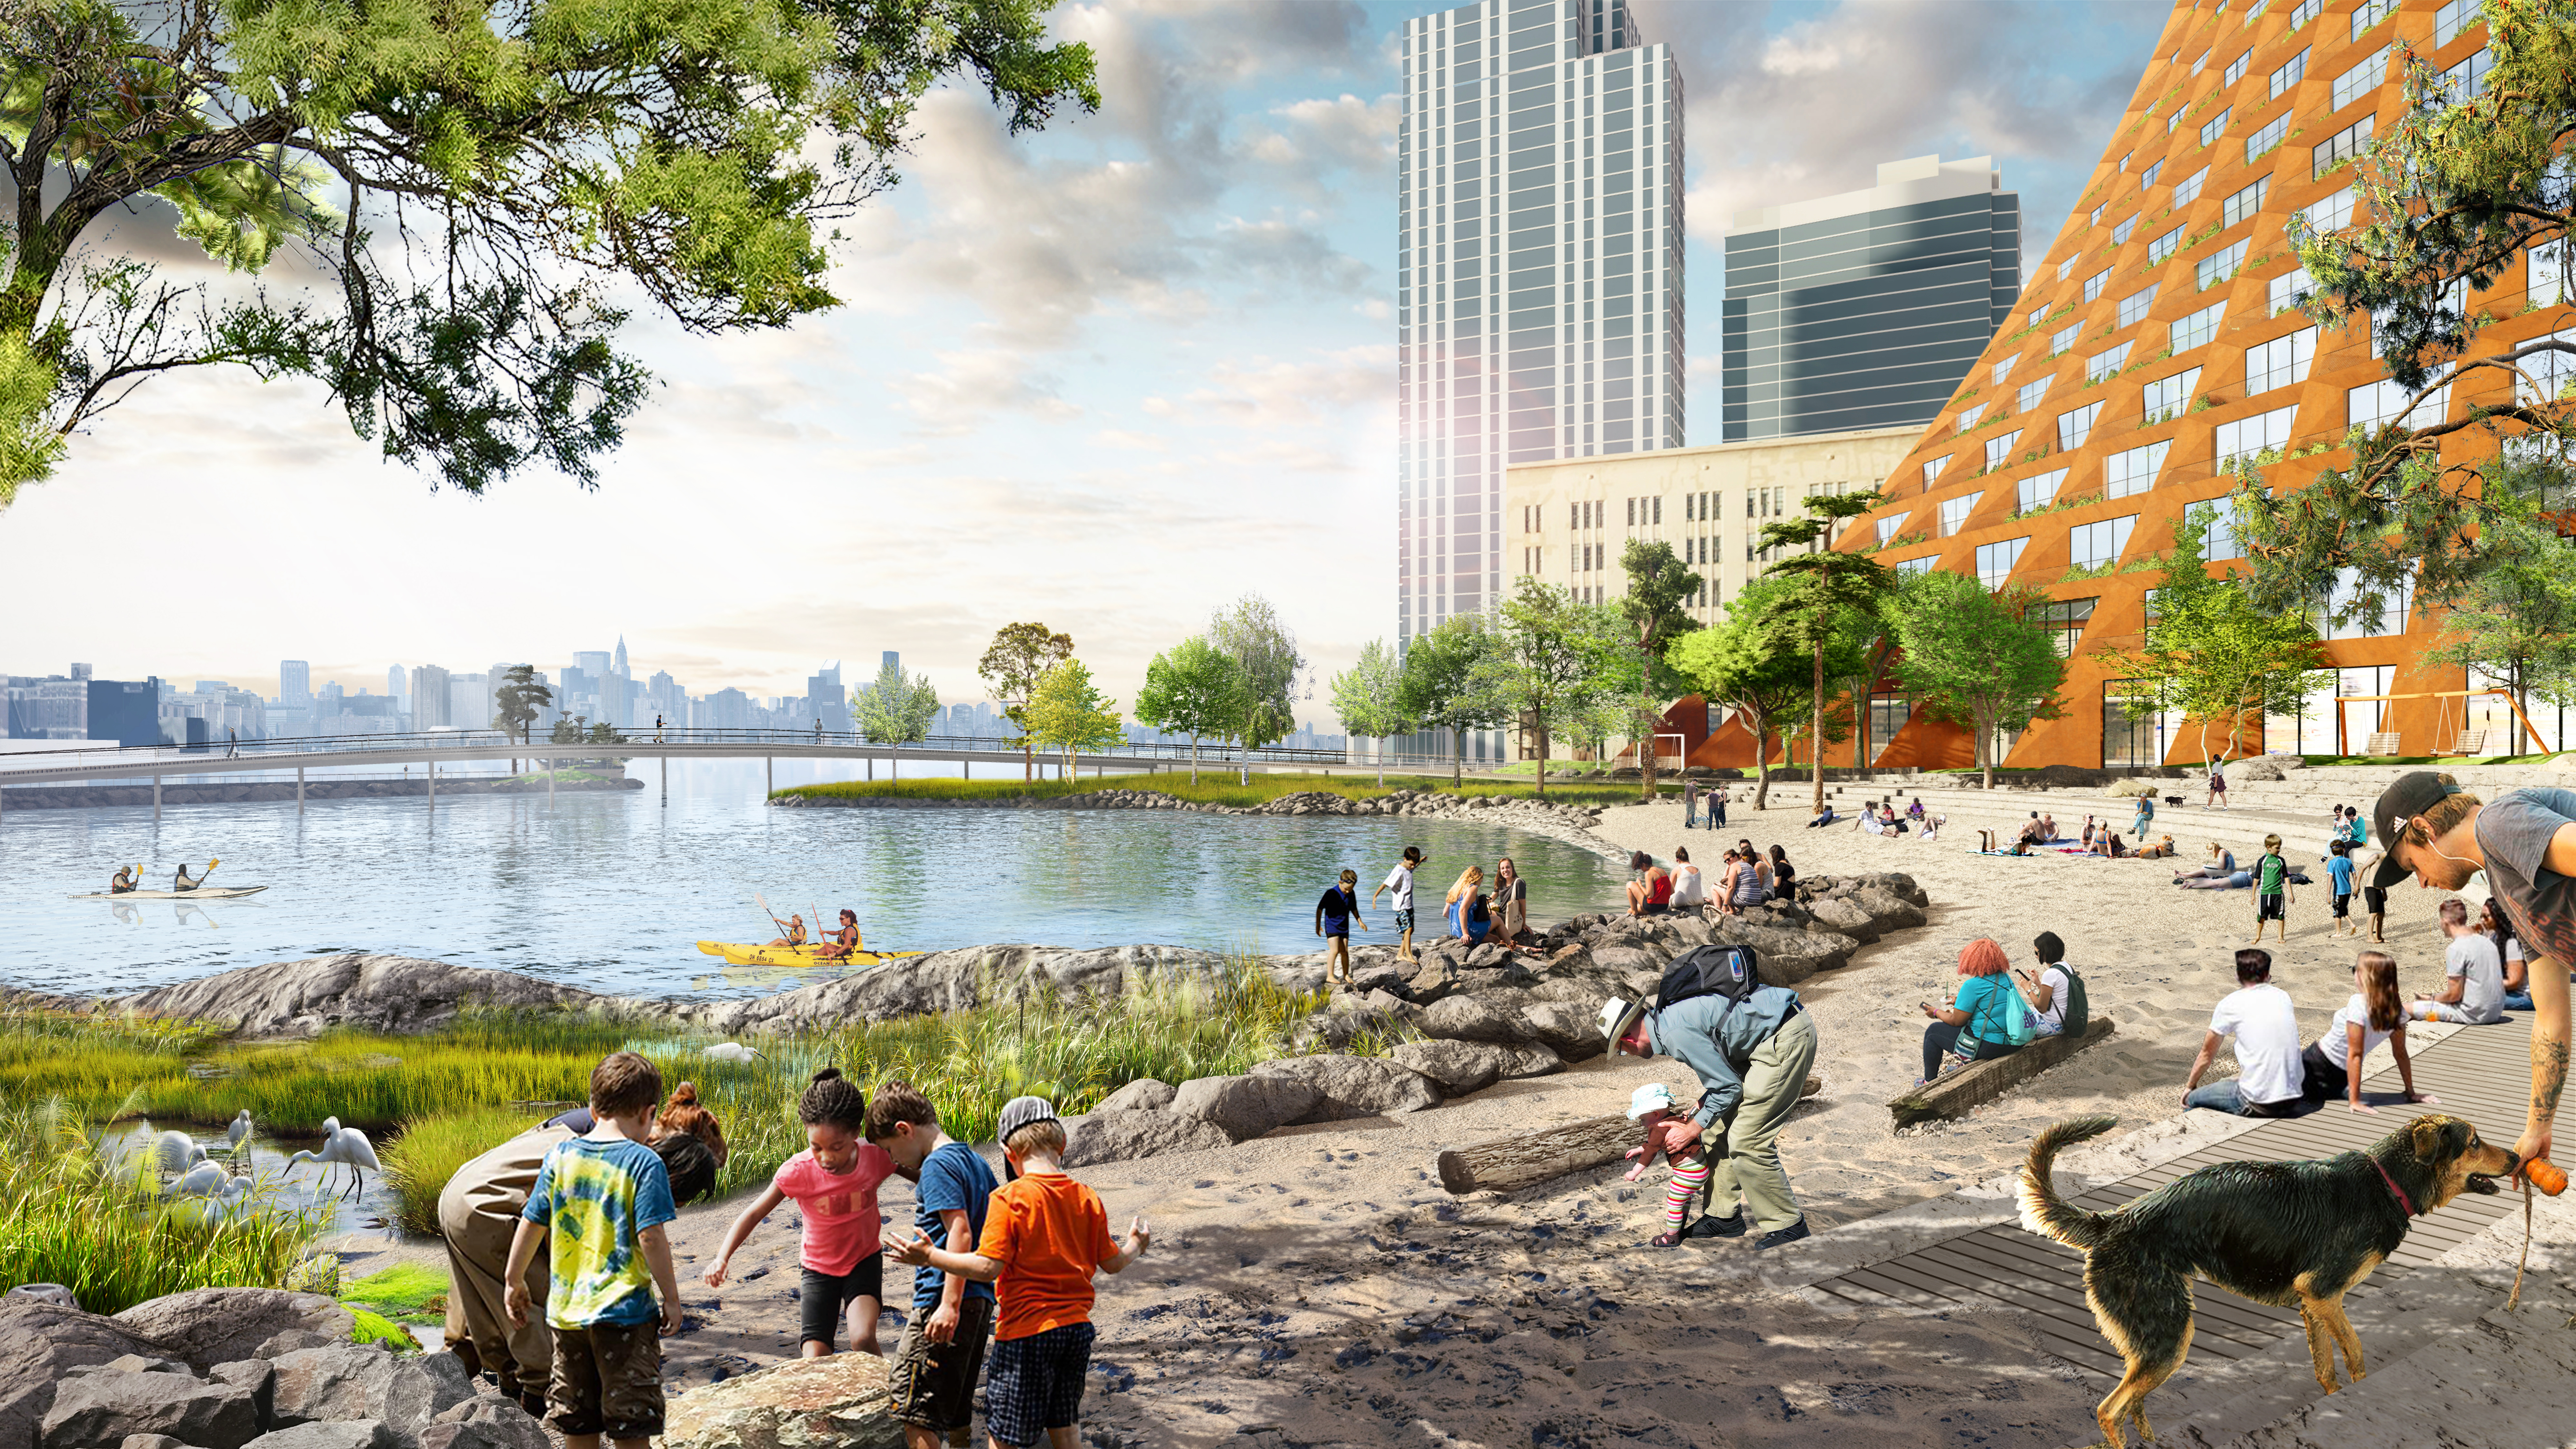 The River Street project would give New Yorkers access to the East River. Rendering by James Corner Field Operations and BIG-Bjarke Ingels Group courtesy of Two Trees Management